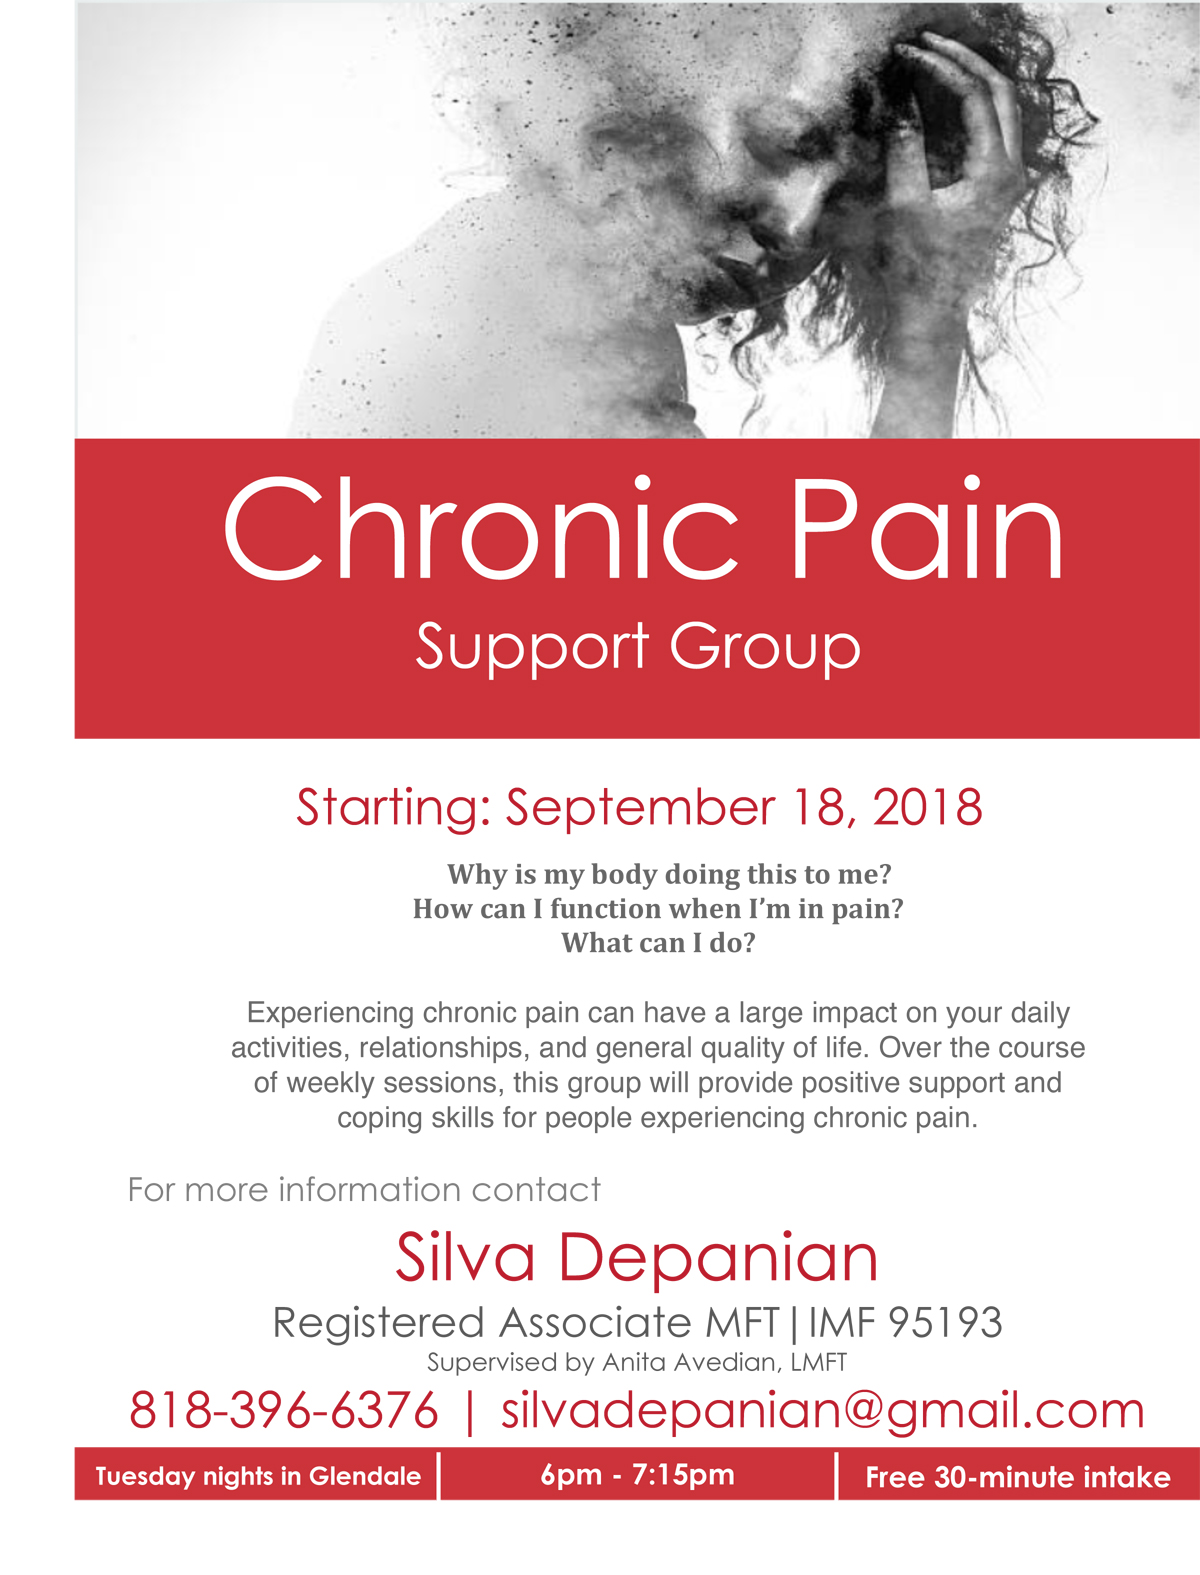 Chronic Pain Physical Therapy - Mangan Physical Therapy - Temecula, CA